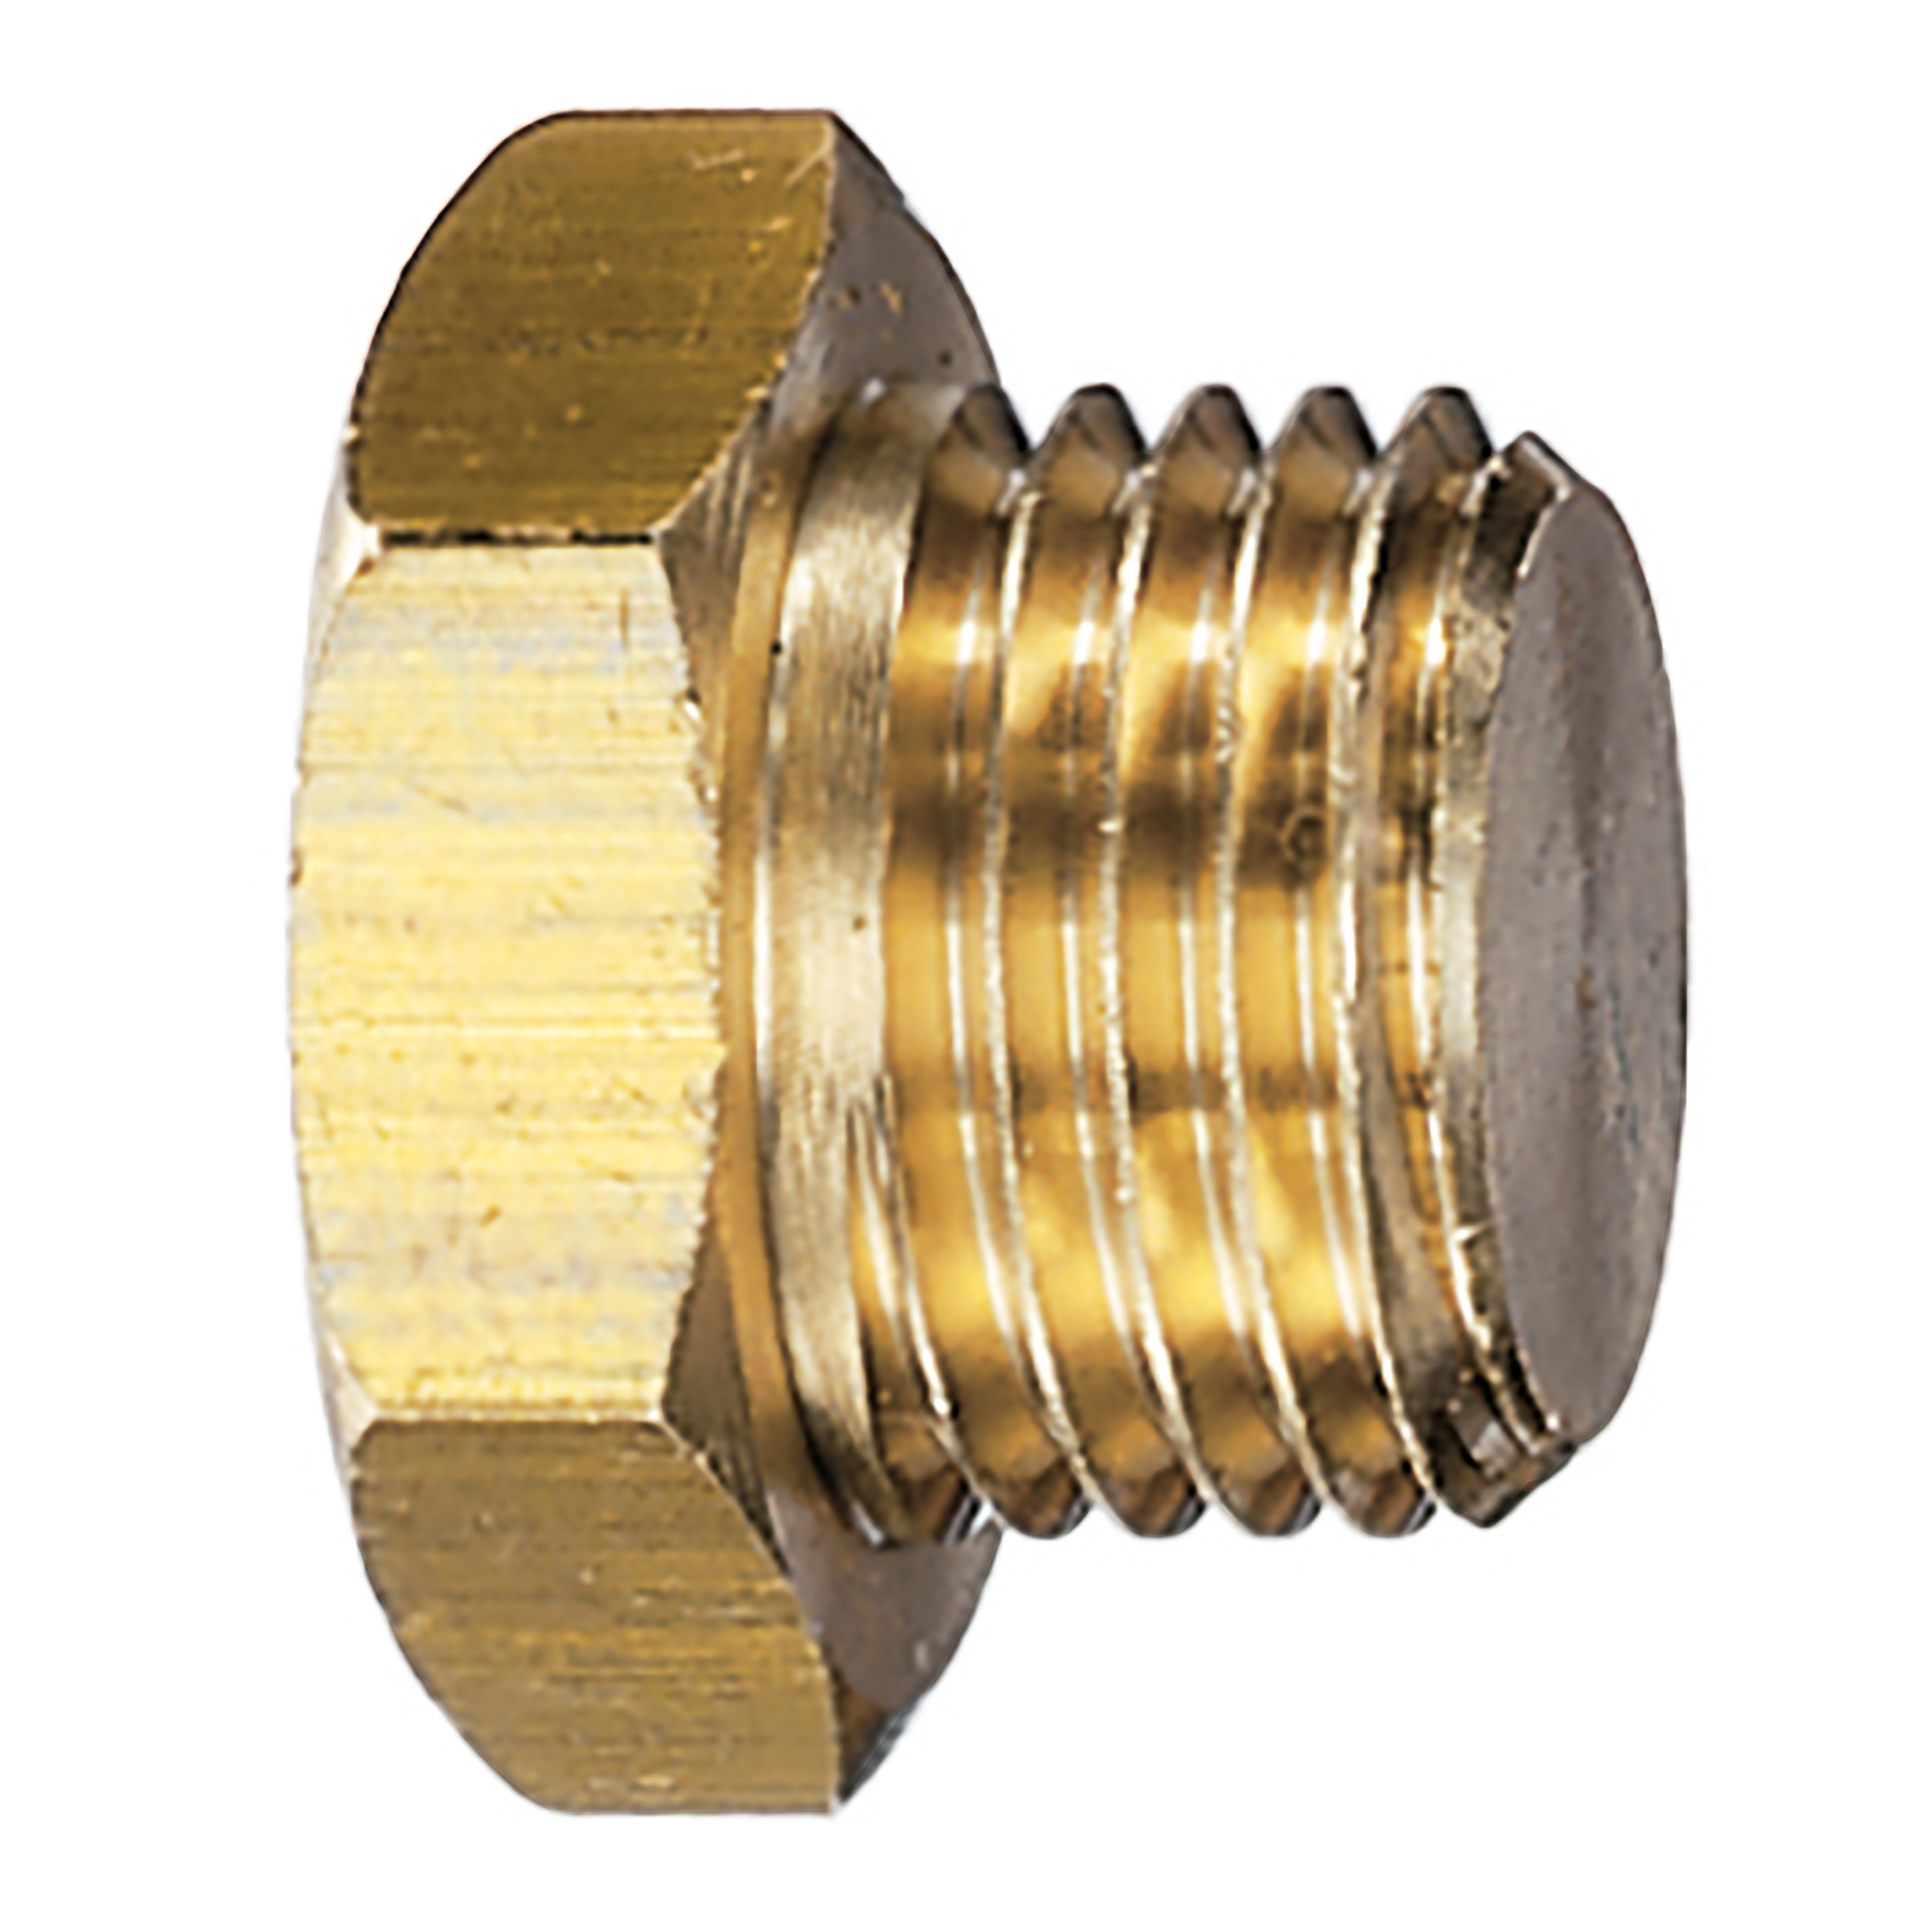 Screw plug, connection: G¼, length: 13 mm, AF 17 mm, max. operating pressure 580 psi, brass, nickel-plated